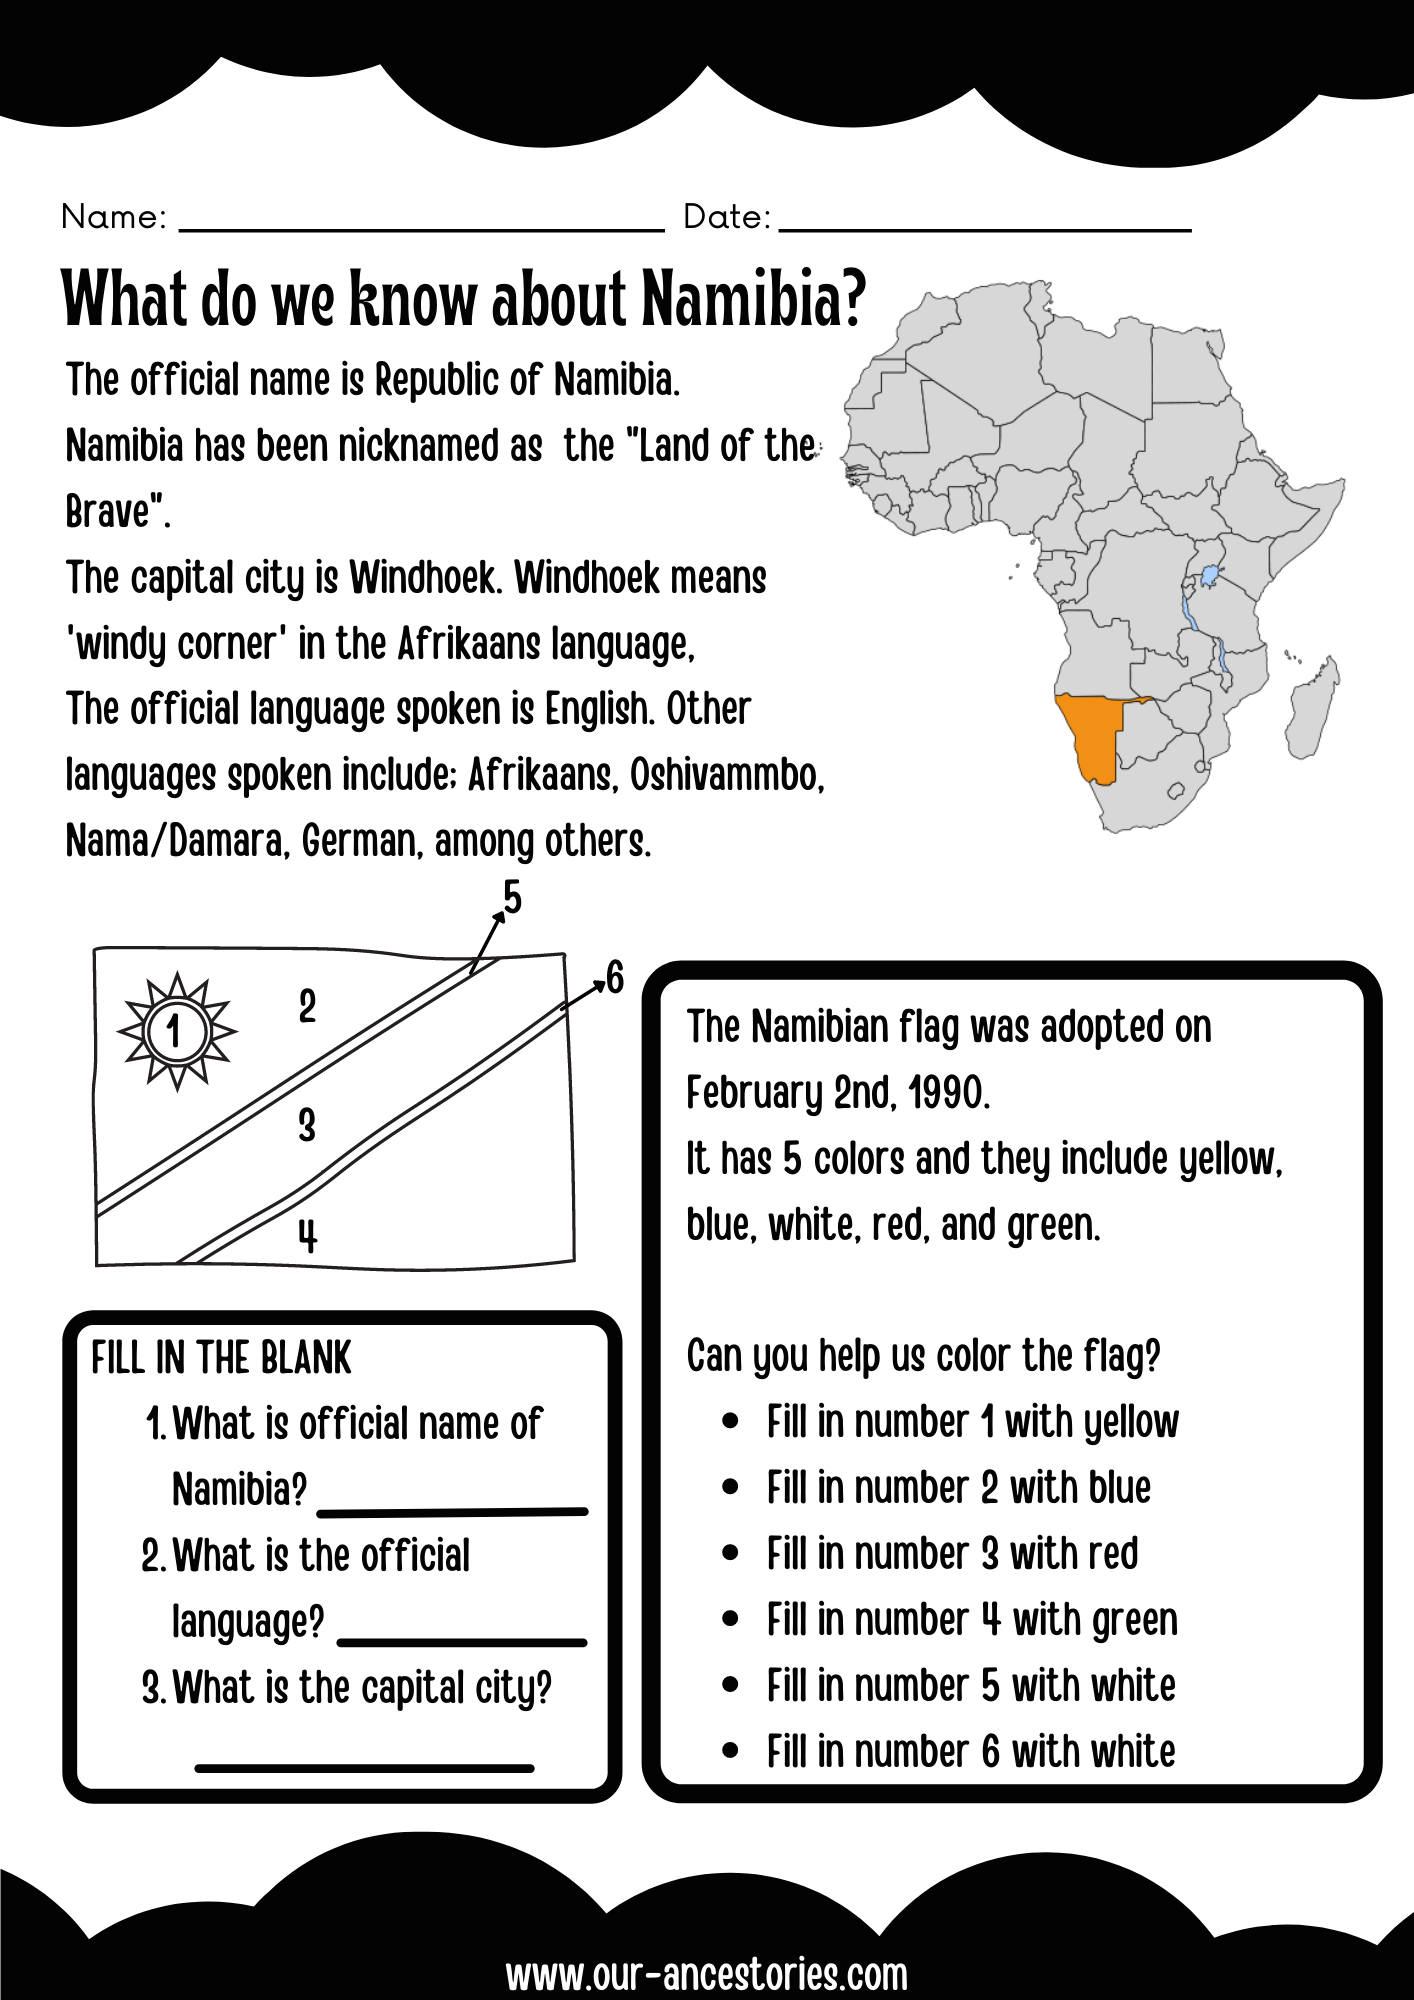 Our Ancestories - Namibia Country Profile - Free Worksheets